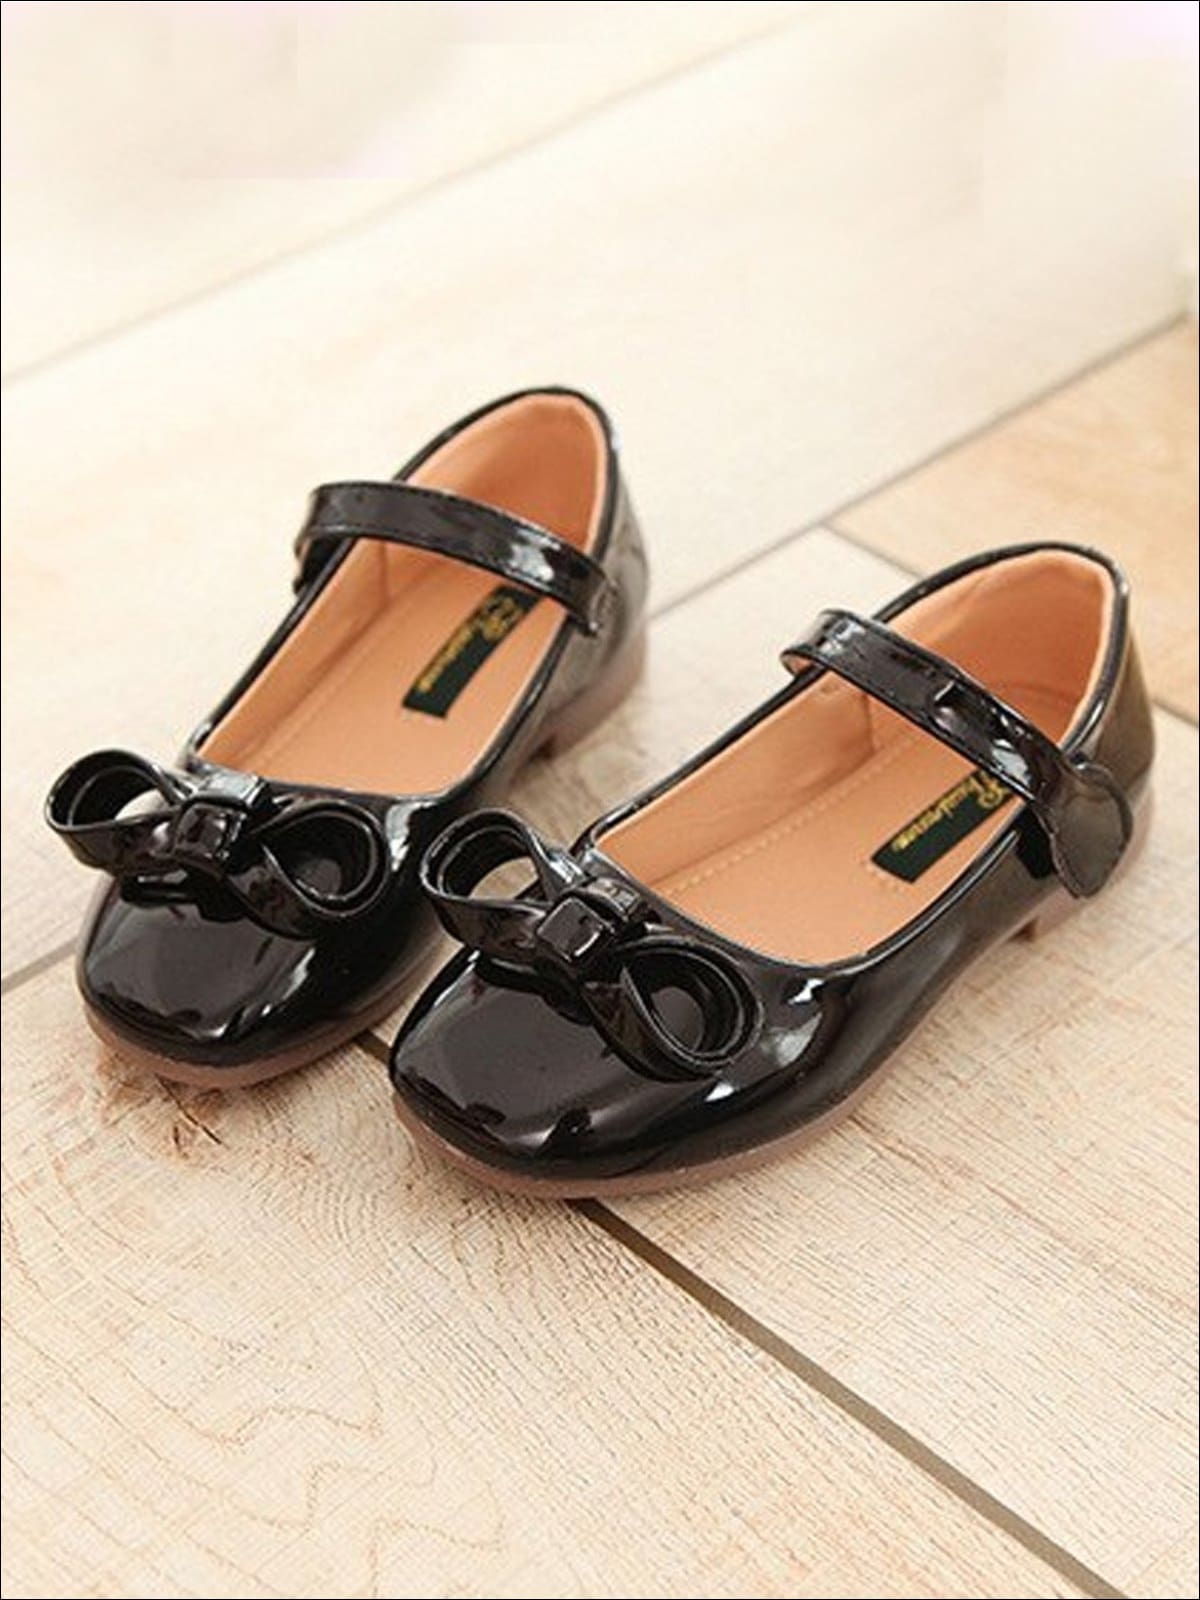 Girls Leather Flats with Bow (3 Color Options) - Black / 1 - Girls Flats